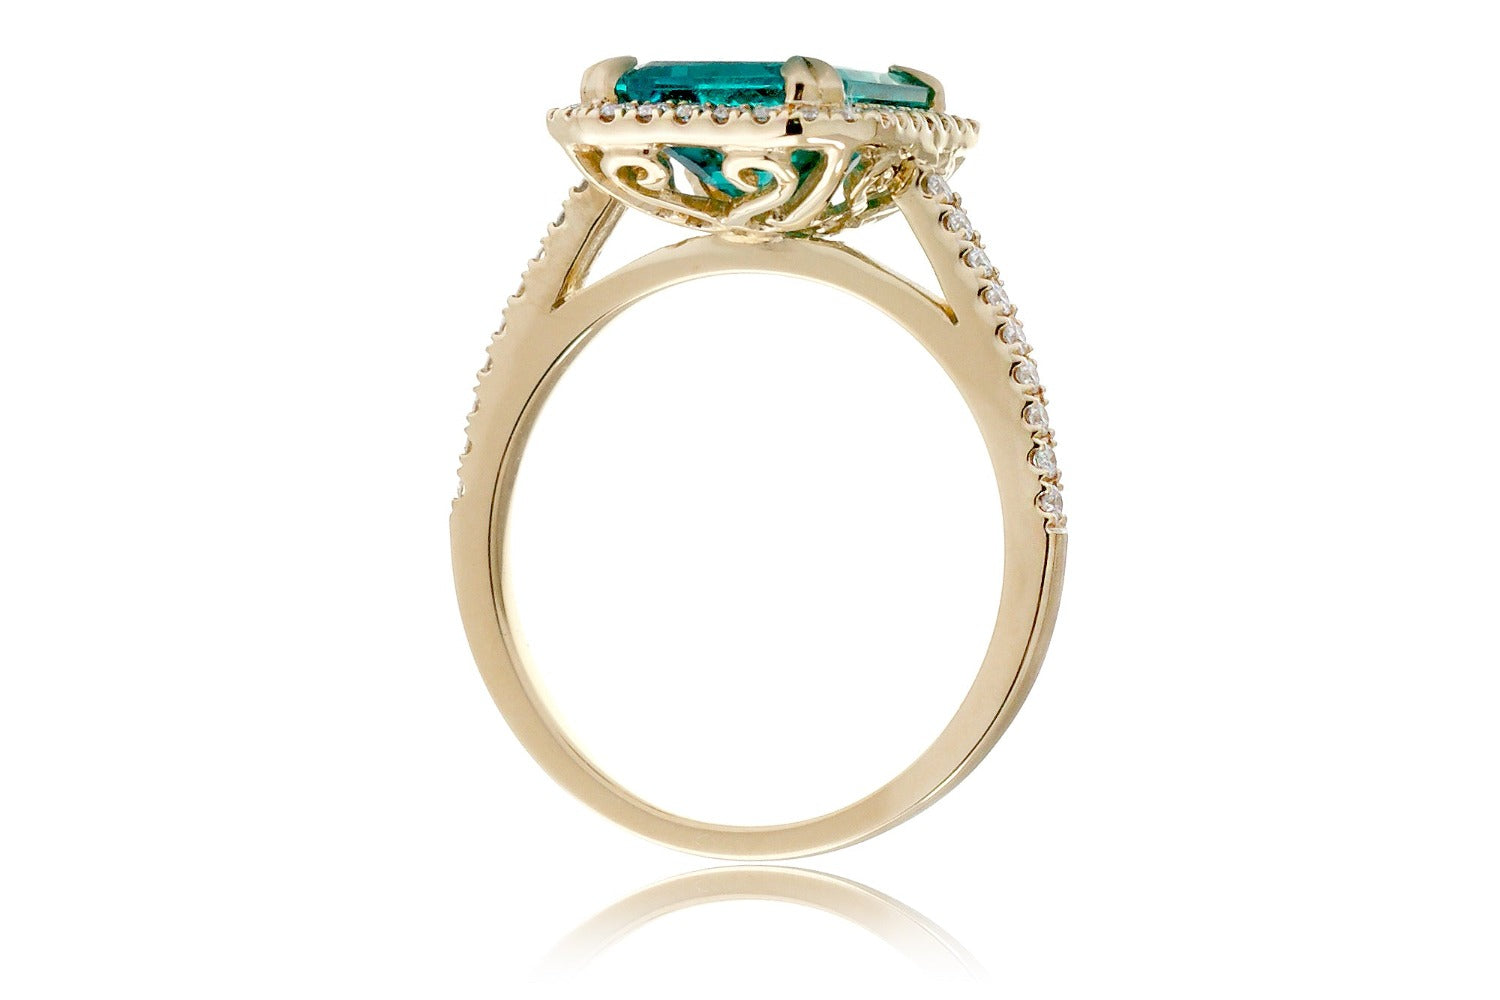 Emerald Cut Emerald With Diamond Halo Engagement Ring In Yellow Gold Cathedral Setting